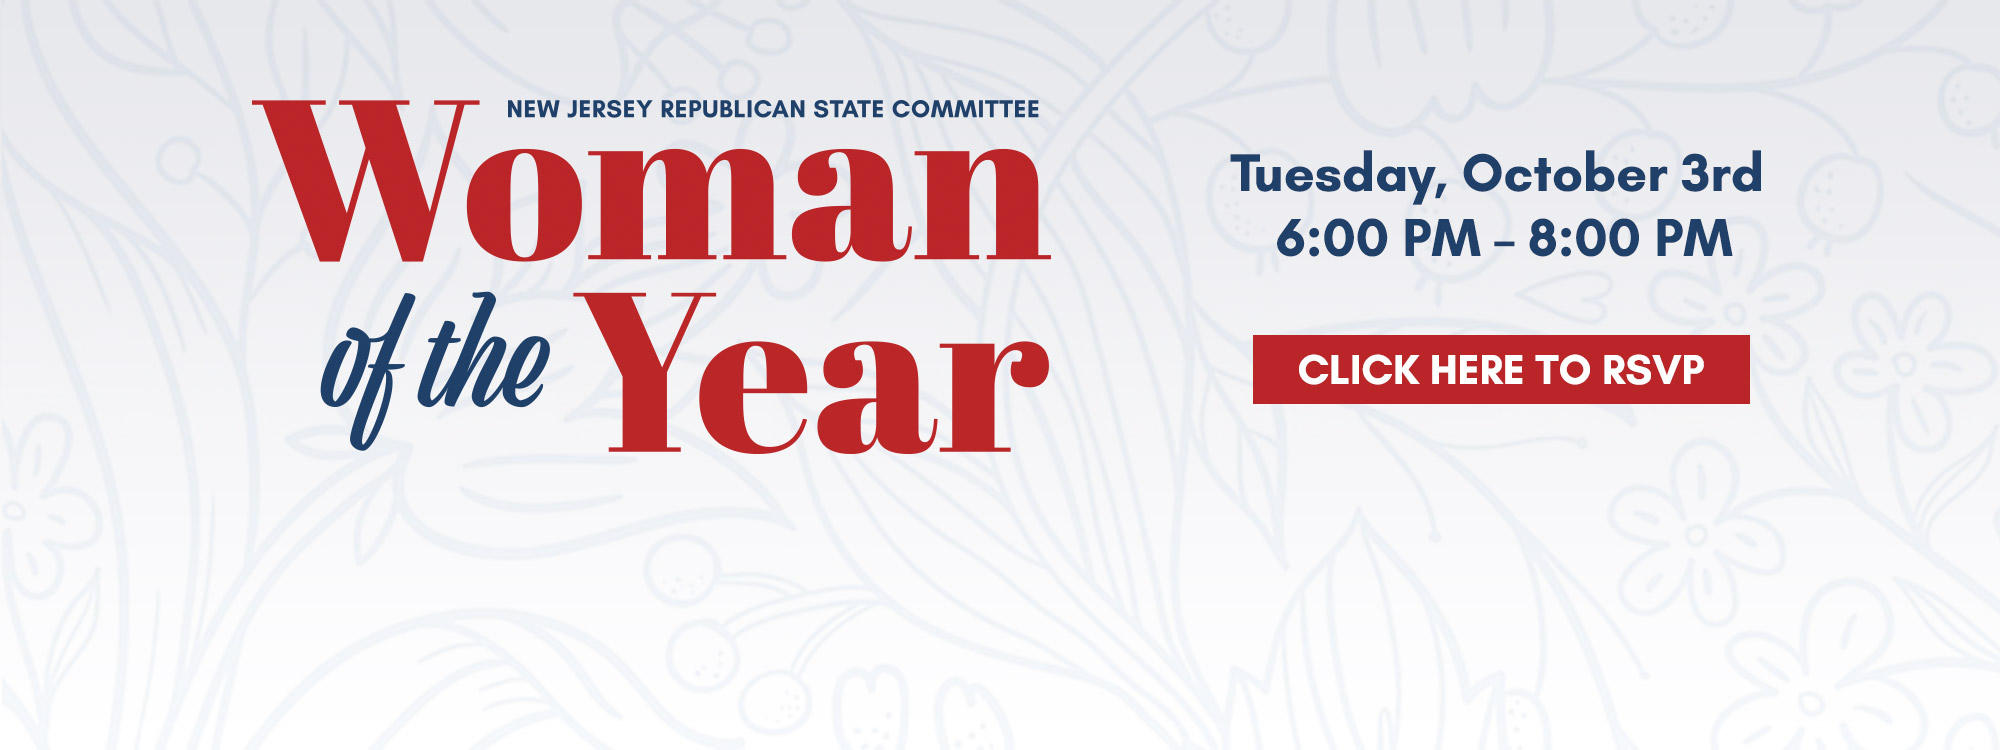 NJGOP 6th Annual Woman of the Year Reception